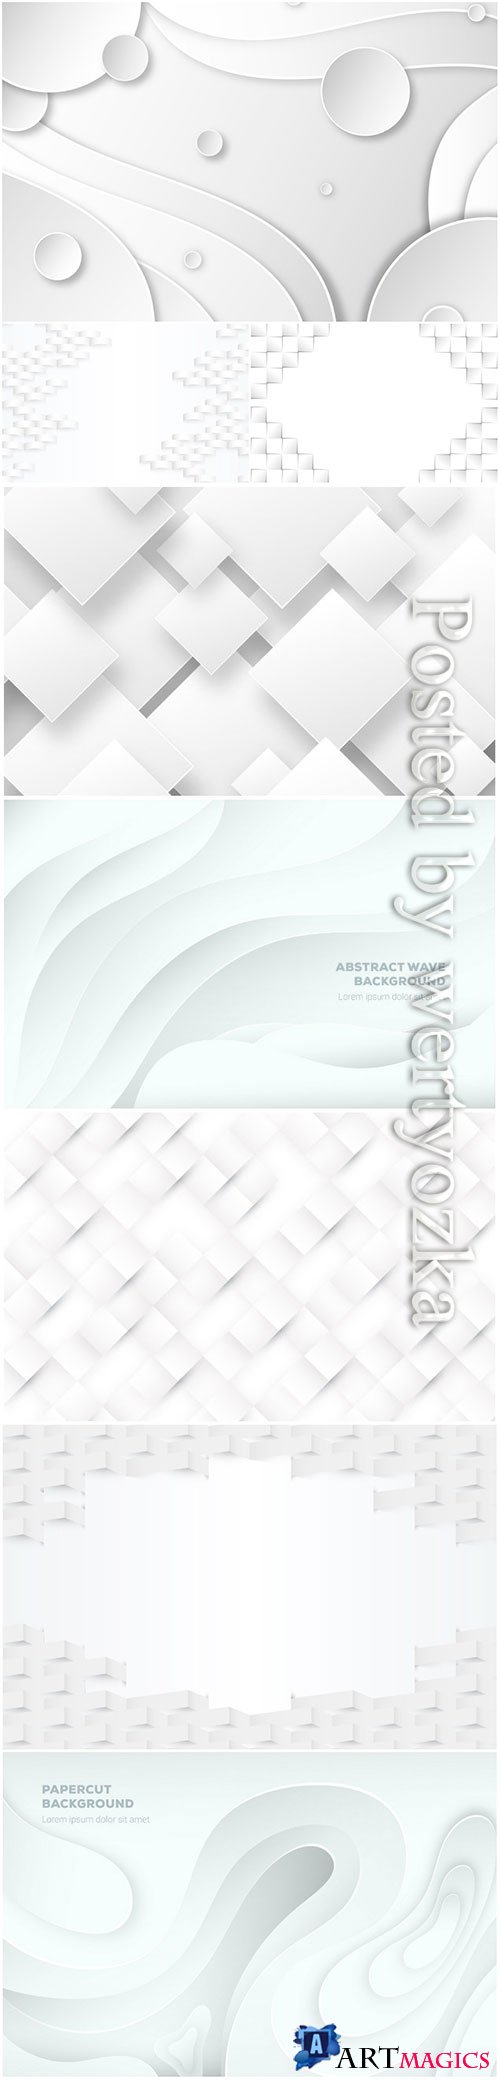 Abstract vector background, 3d models template # 8